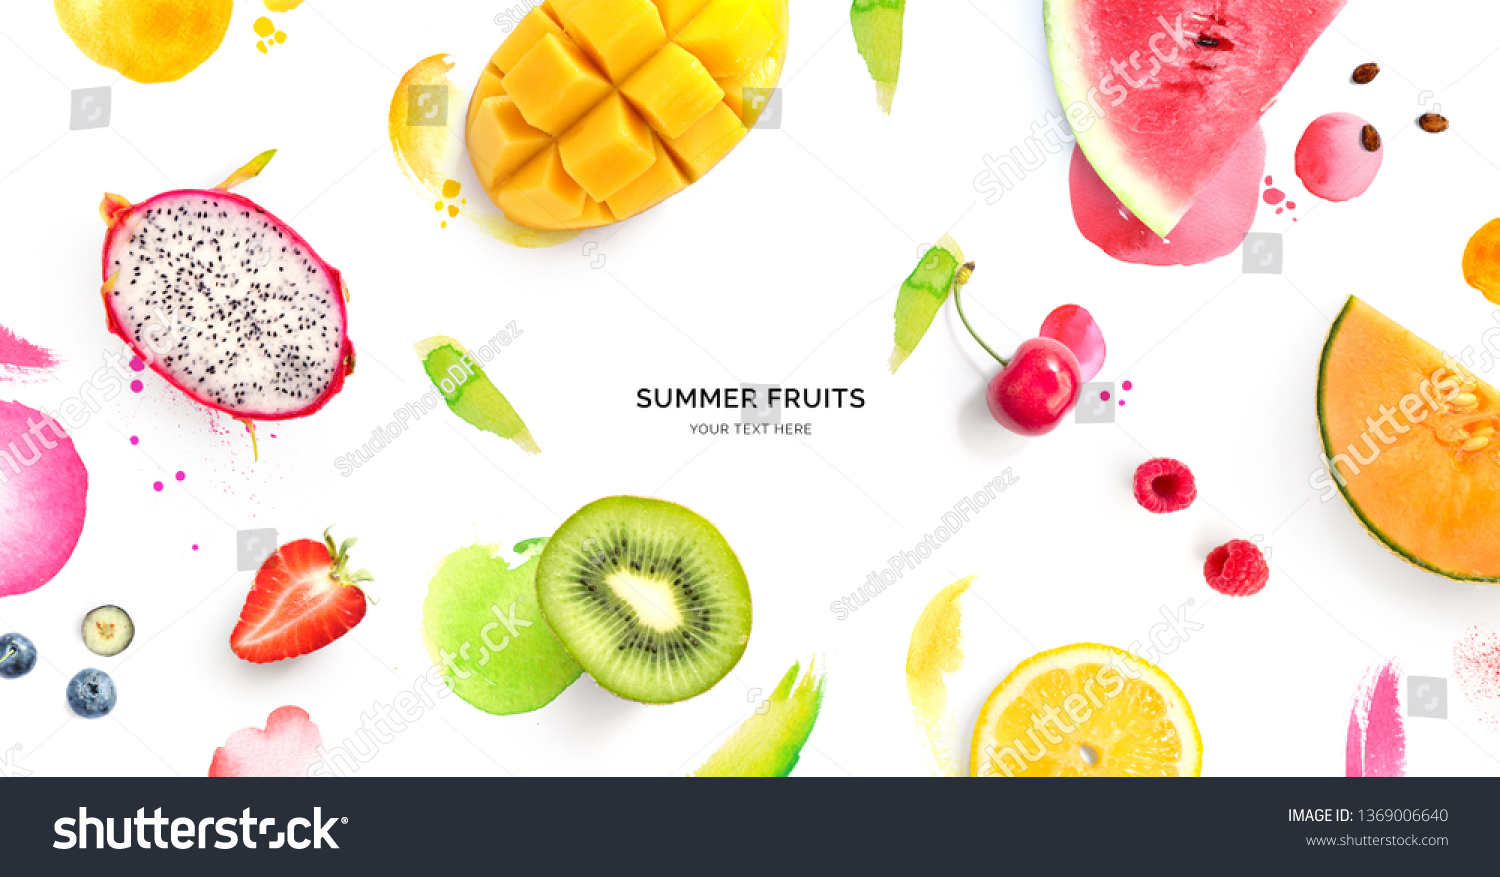 Creative layout made of dragonfruit, melon, watermelon, cherry, kiwi, strawberry, mango on the watercolor background. Flat lay. Food concept. #1369006640